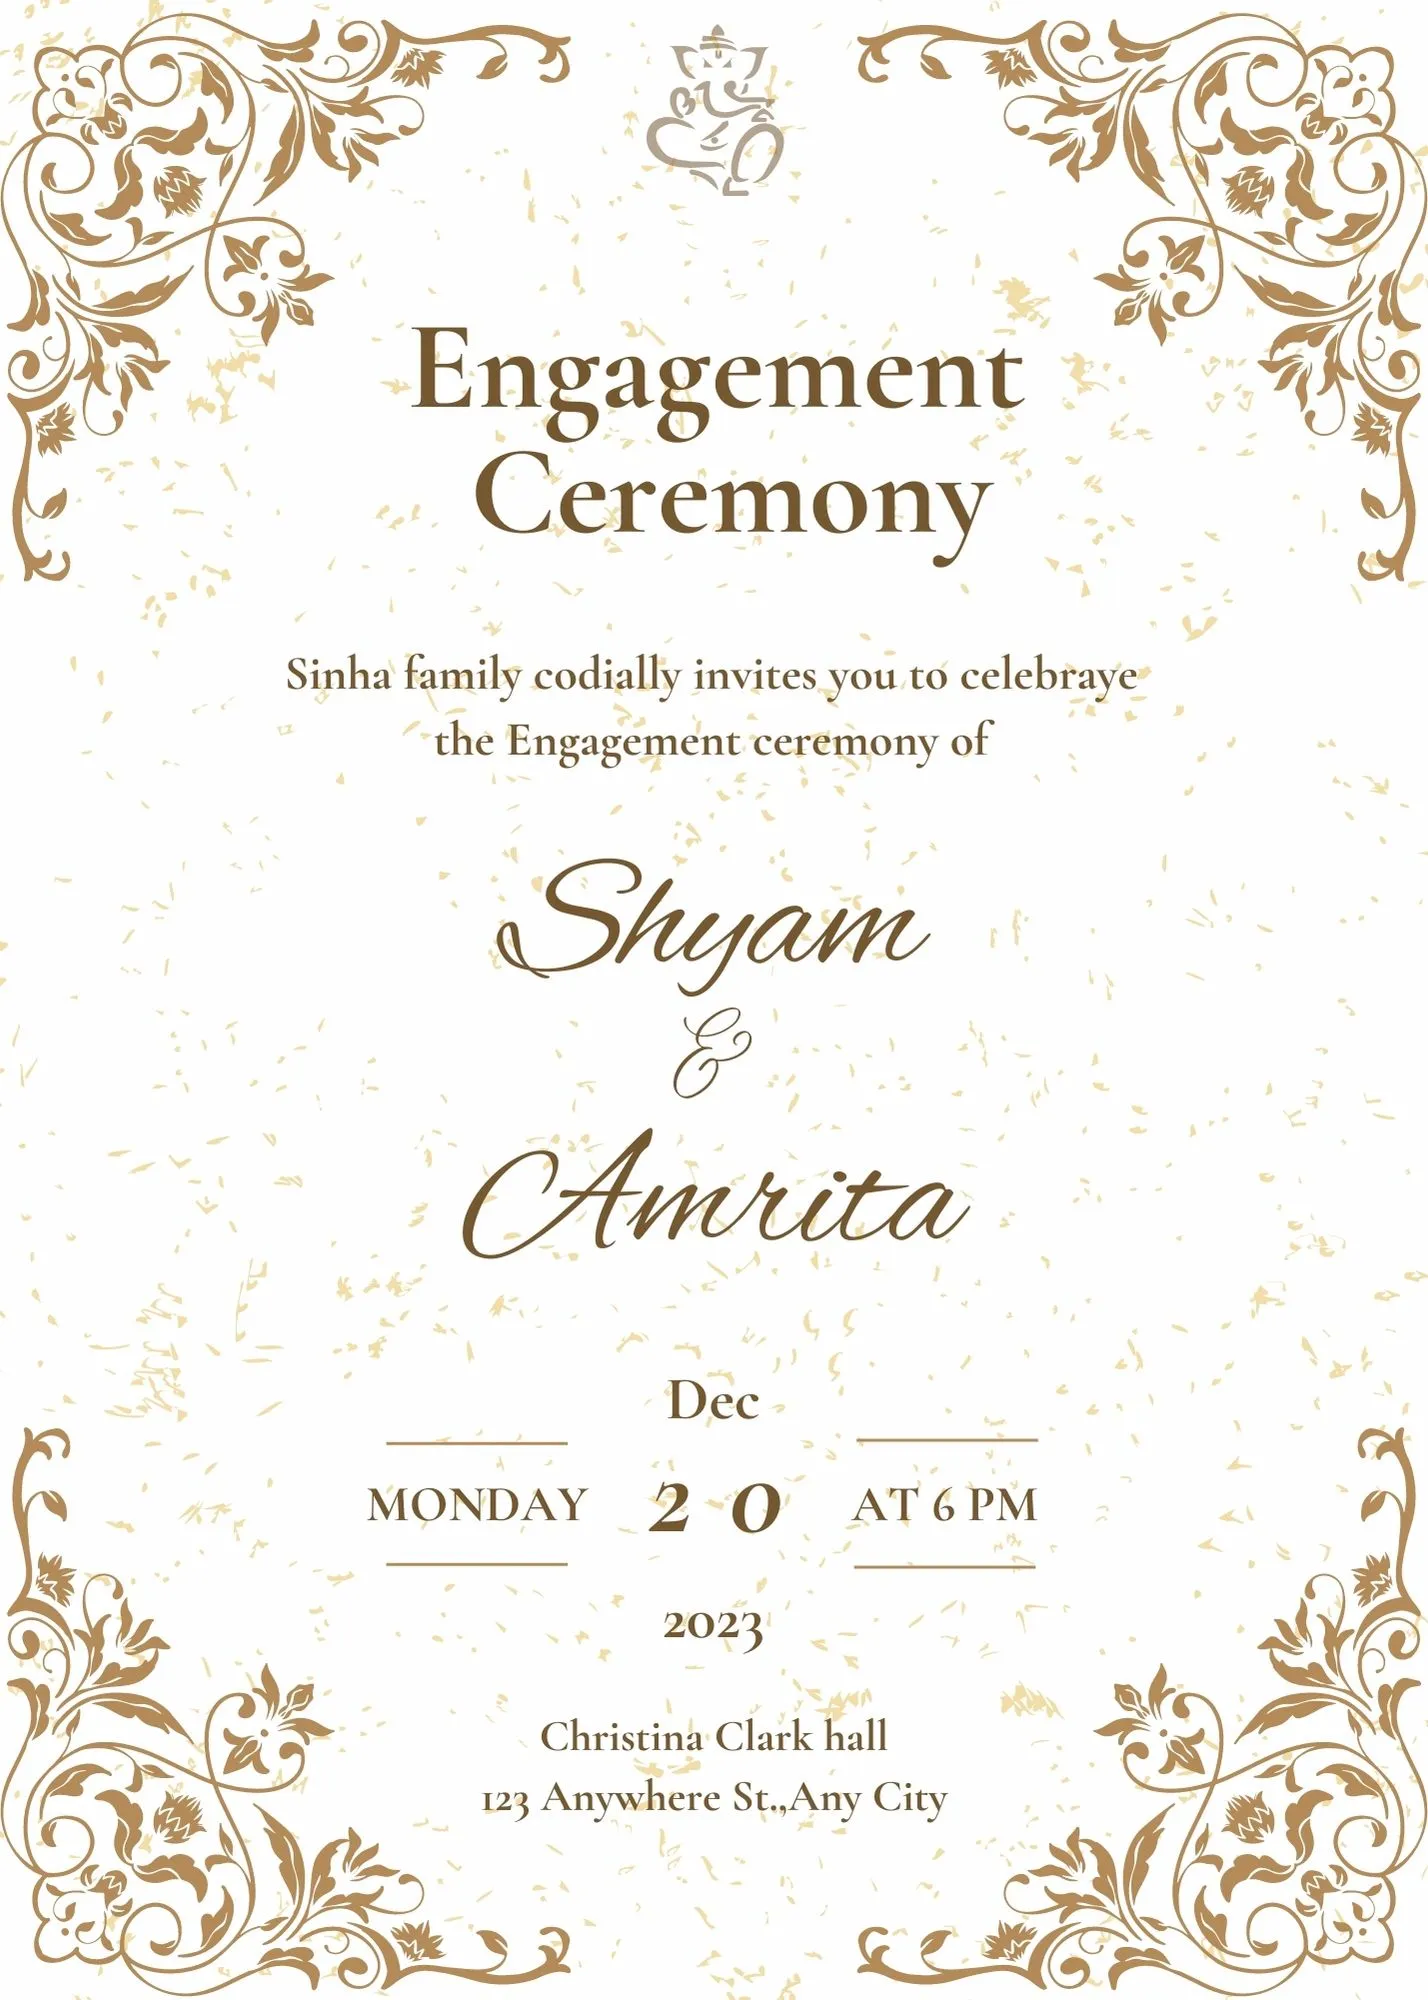 Video Engagement ceremony card